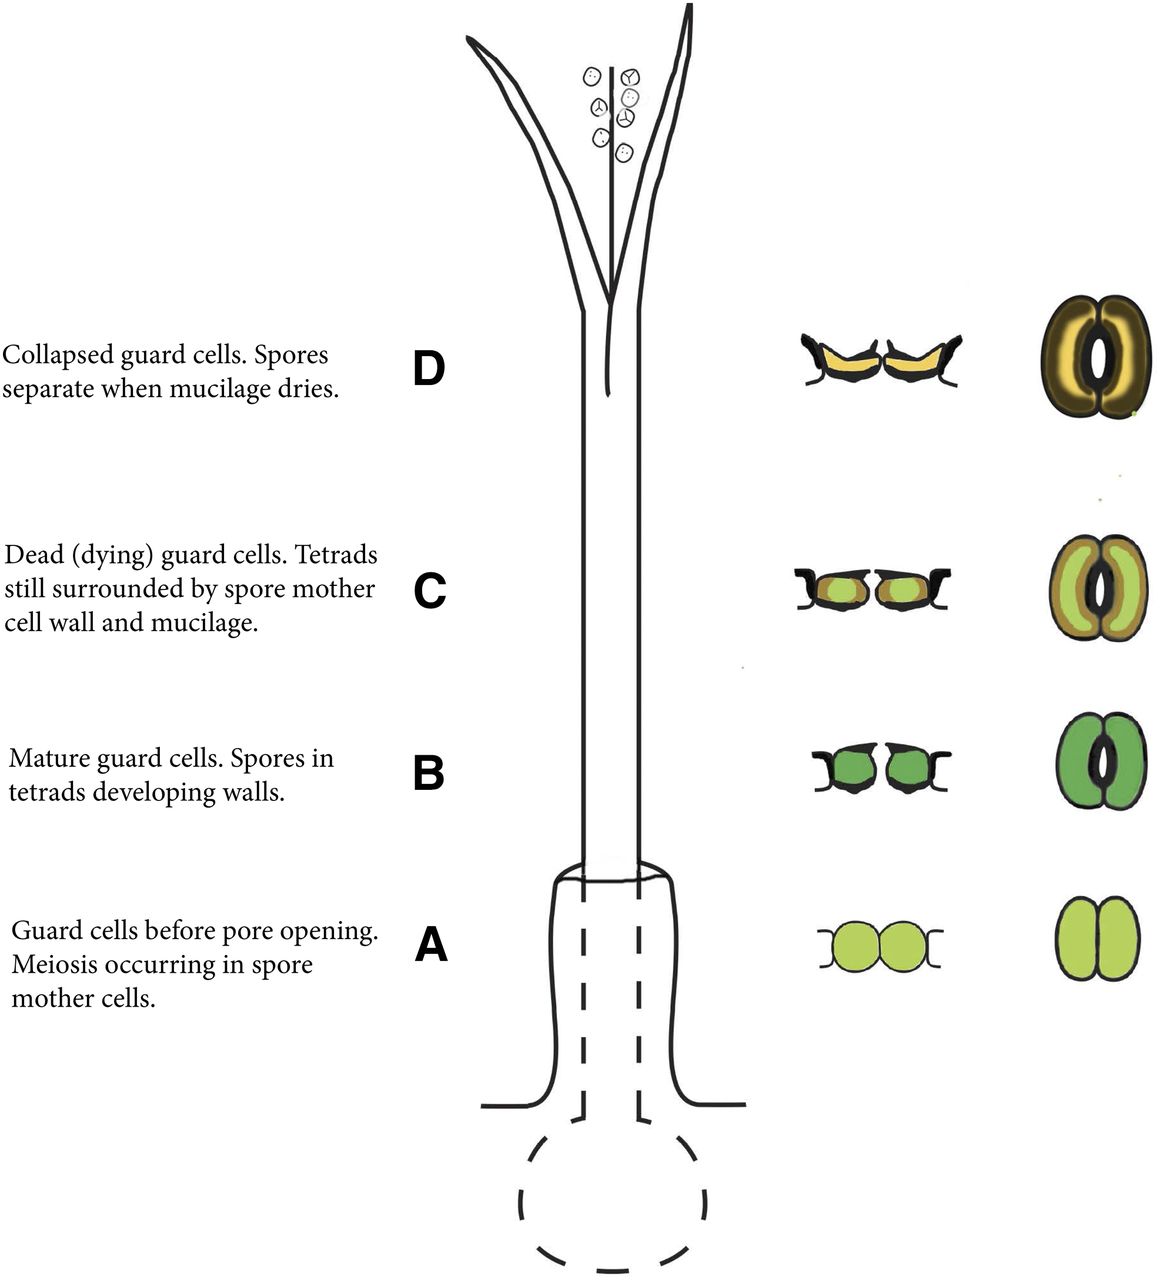 A diagram of sporophyte maturation. Descriptive text: The base is labeled A and says "Guard cells before pore opening. Meiosis occurring in spore mother cells." There are stomata shown to the right at this level that are plump, light green, and closed. Above this region, it is labeled B and says "Mature guard cells. Spores in tetrads." The stomata to the right are a darker green and open. The area above this is labeled C and says "Dead (dying) guard cells. Spore tetrads still surrounded in mother cell wall/mucilage." The stomata to the right are slightly deflated, lighter green and lined with brown. The top of the sporangium, labeled D, has dehisced open and the text says "Collapsed guard cells. Spores separate when mucilage dries." The stomata on the right are yellow lined with dark brown, deflated, and open.